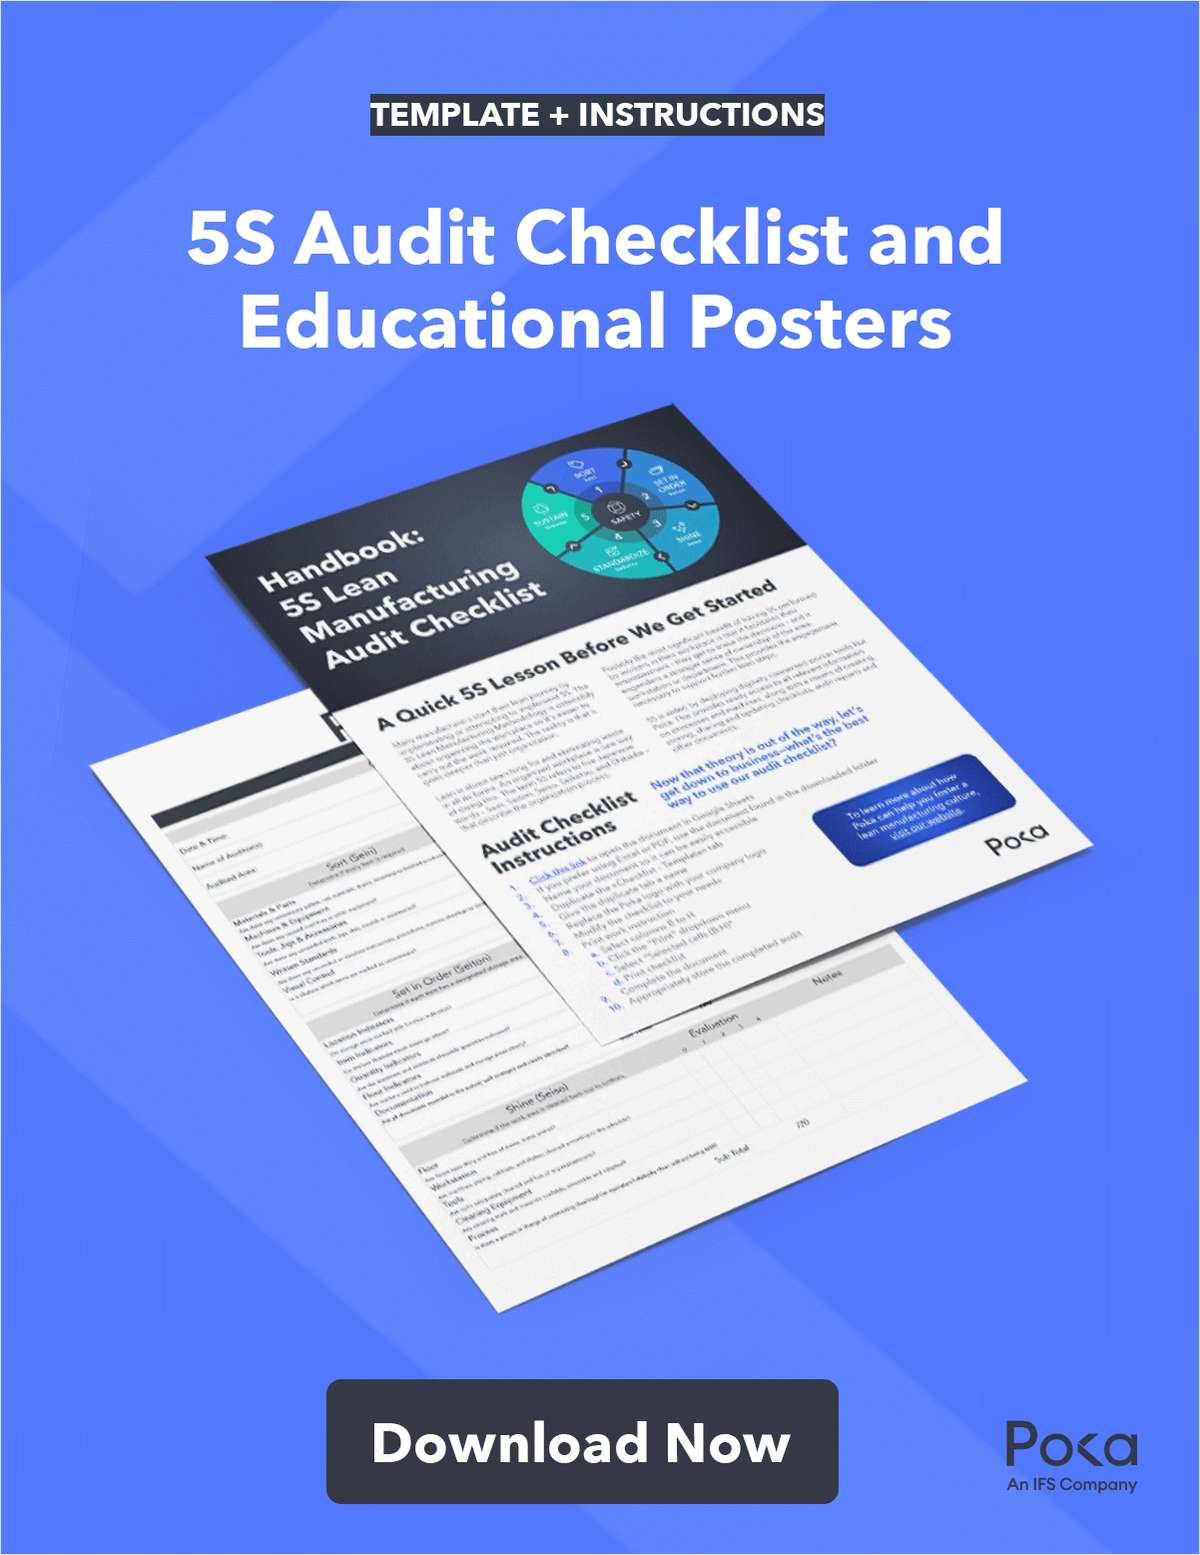 Poka 5S Audit Checklist and Educational Posters